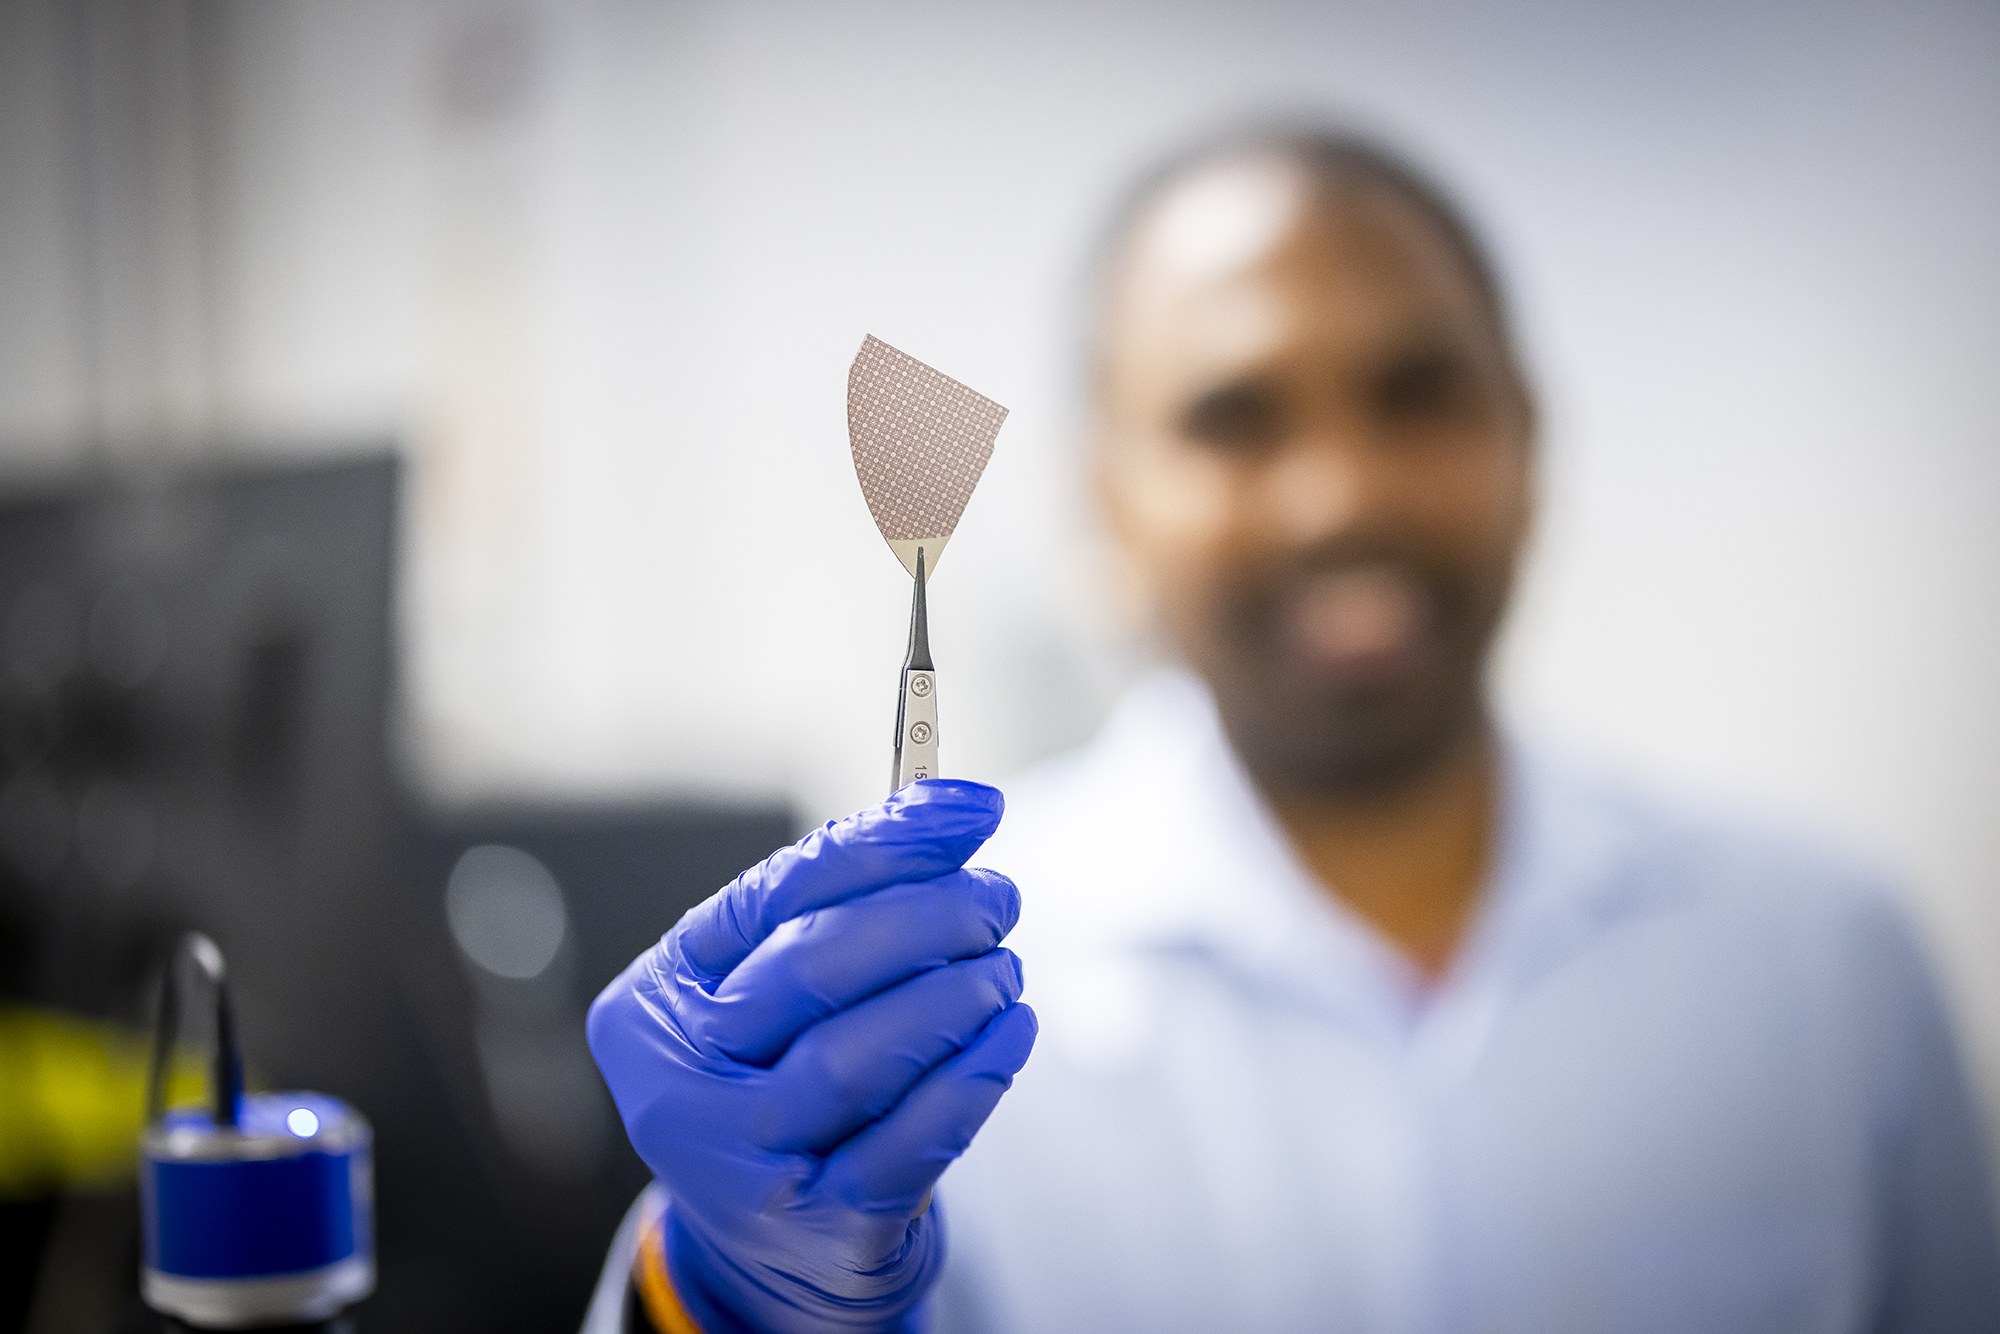 Researcher, out of focus and in the background, holding a pinching tool clasping a memory storage device.